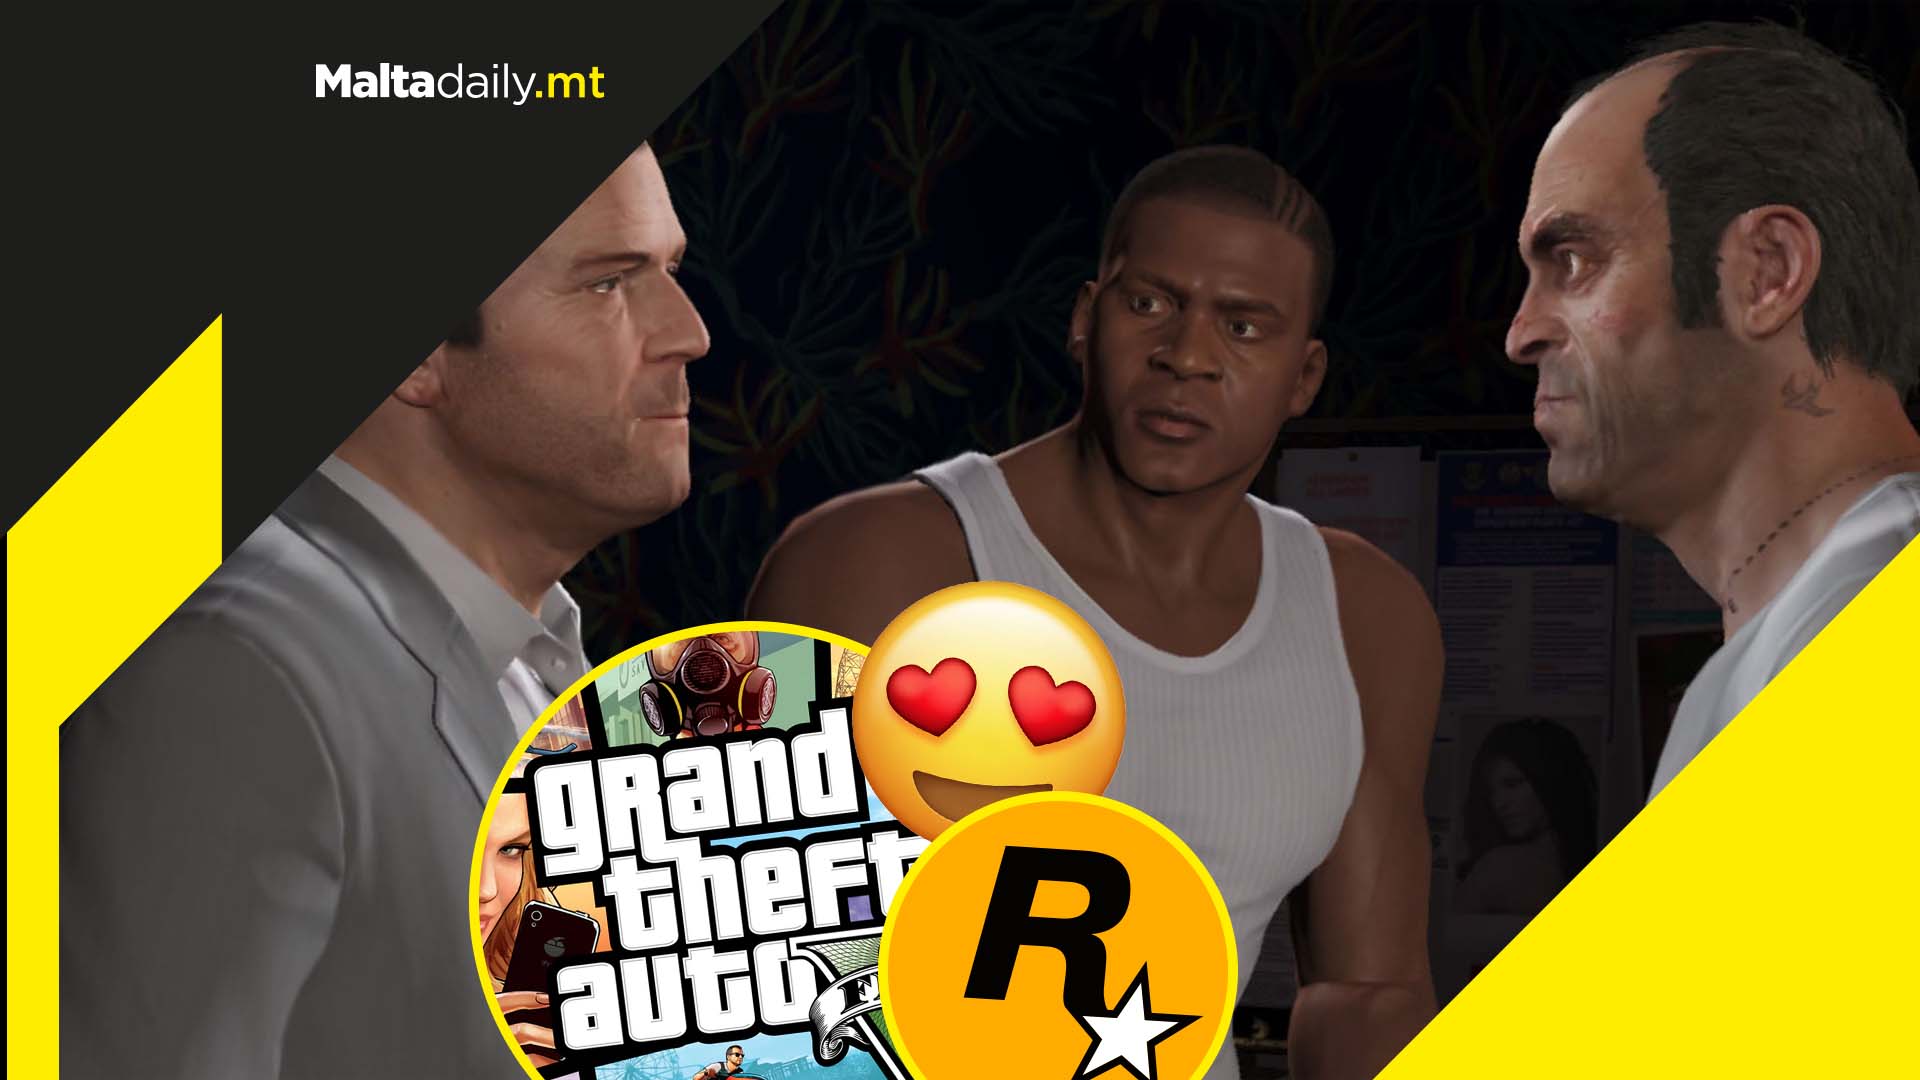 Grand Theft Auto V follow-up is finally coming, Rockstar Games confirm